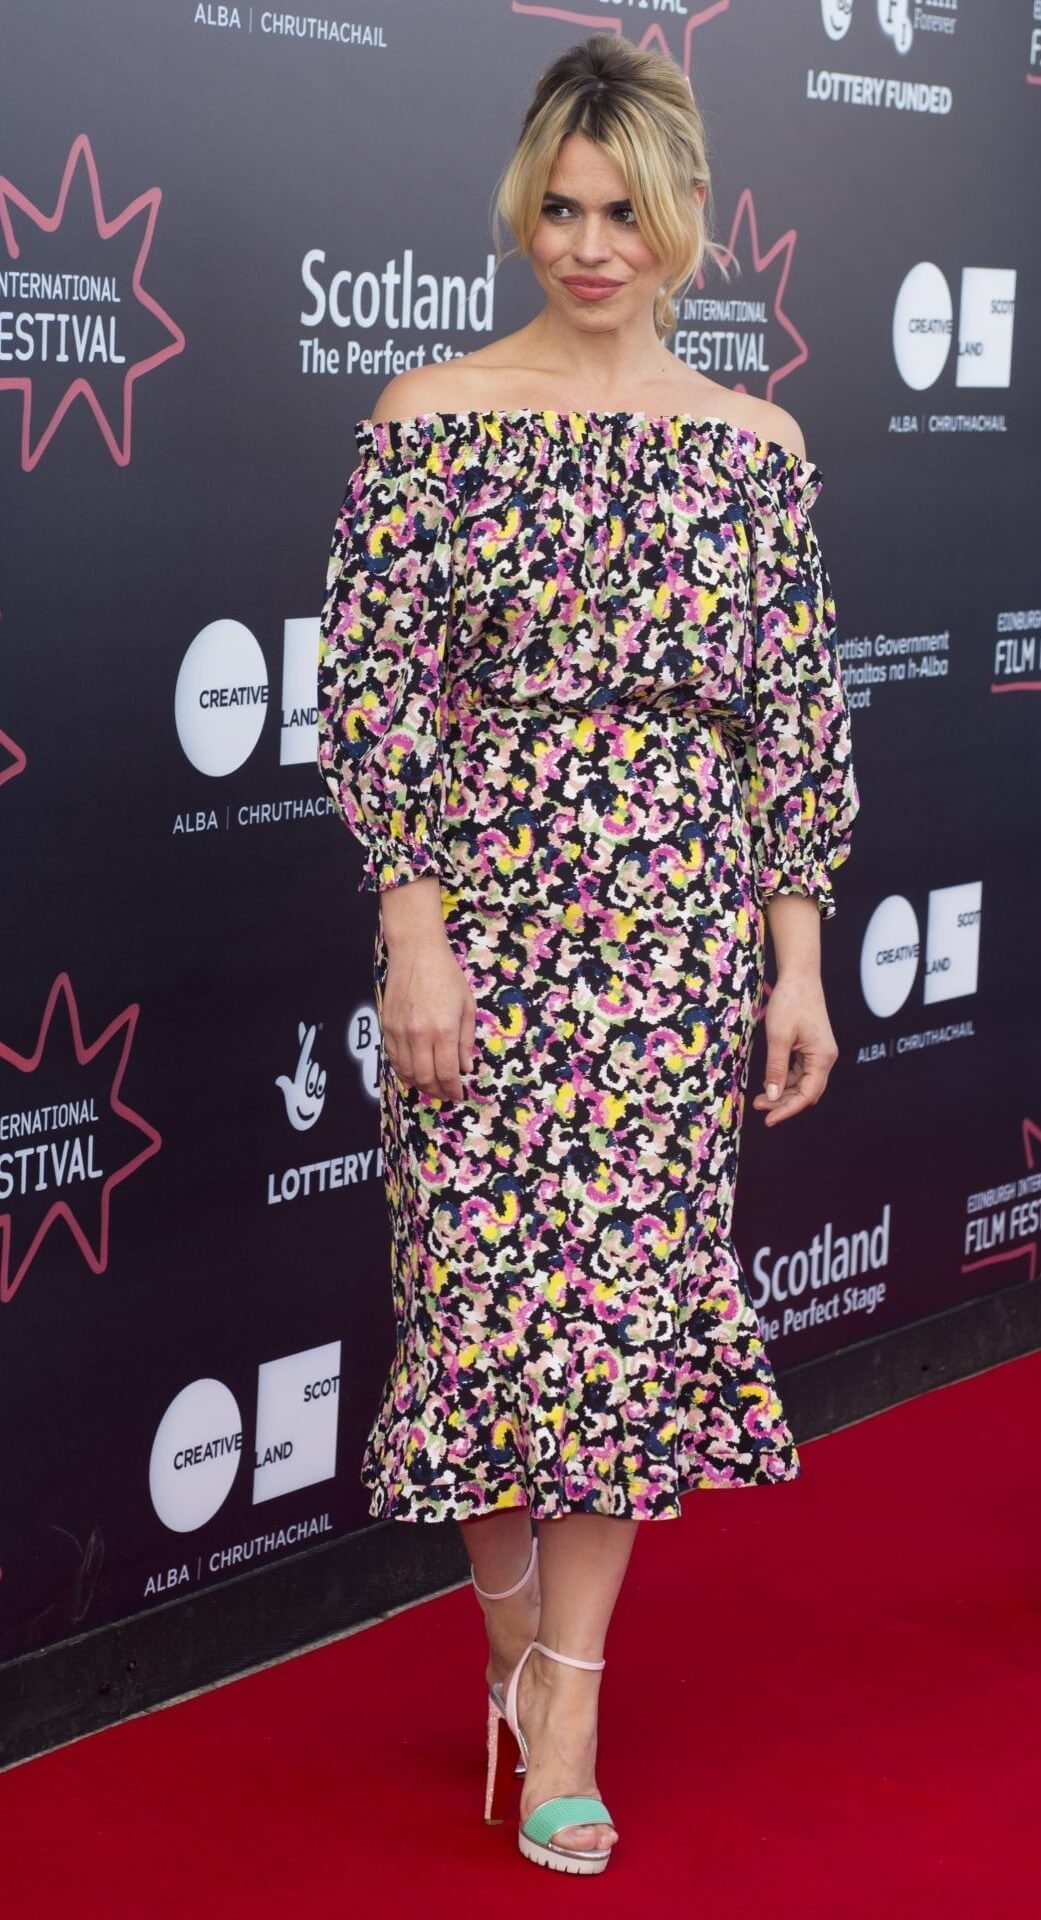 Billie Piper  In Printed Off Shoulder Full Sleeves Ruffle Dress At “Two for Joy” Premiere at EIFF in Edinburgh